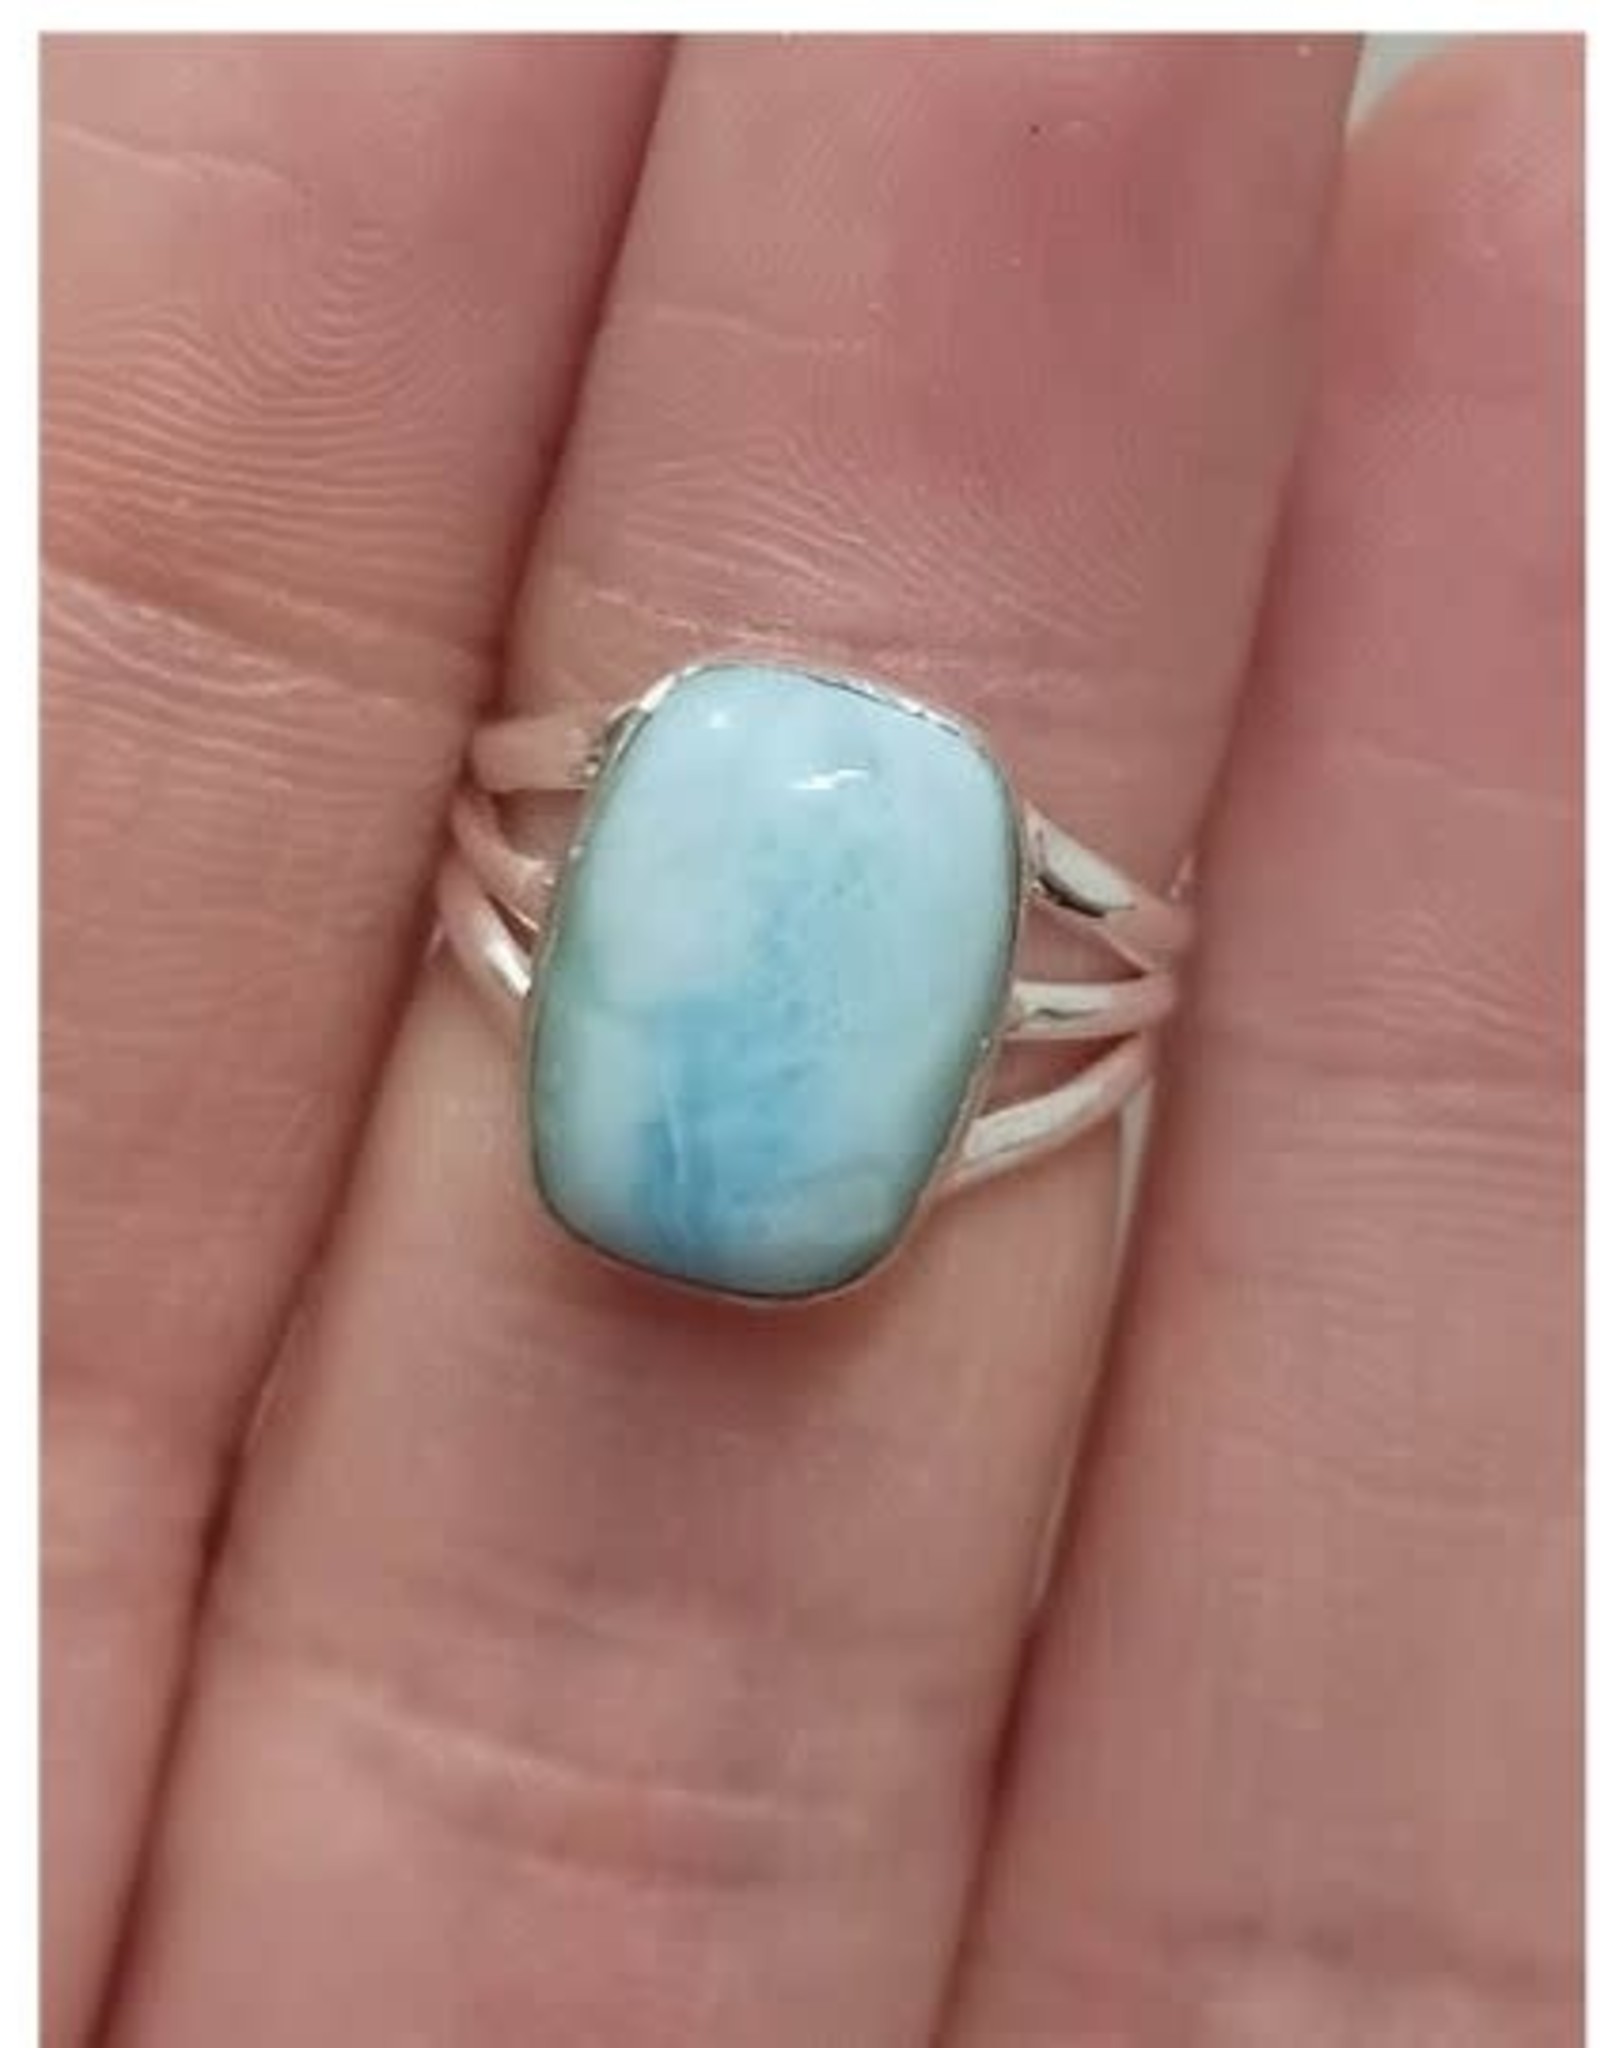 Larimar Ring G - Size 6 Sterling Silver